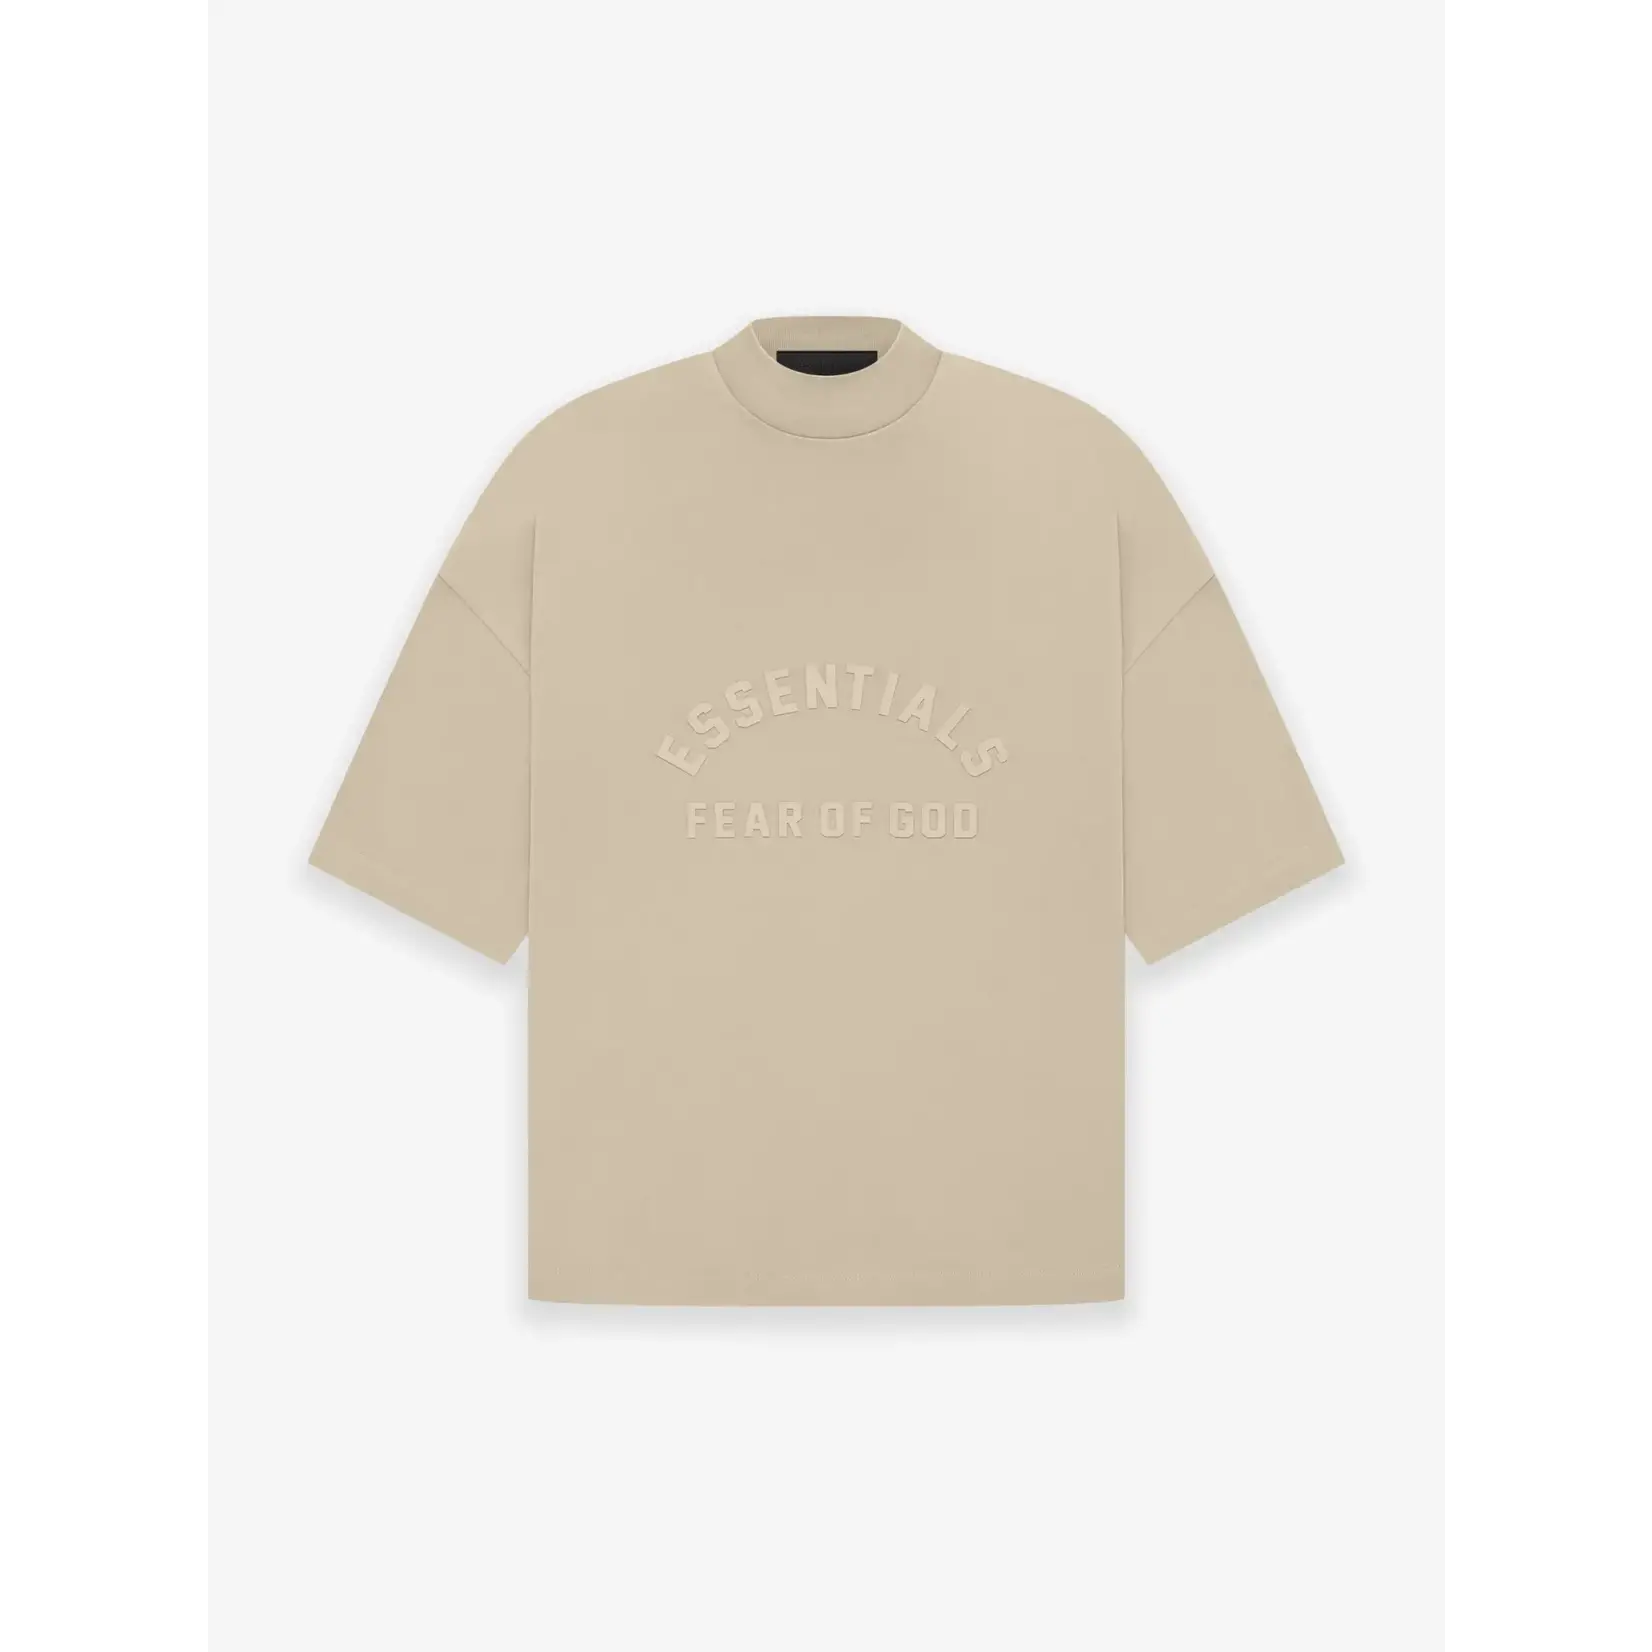 Fear Fear of God Essentials T Shirt Dusty Beige Size XLarge, DS BRAND NEW